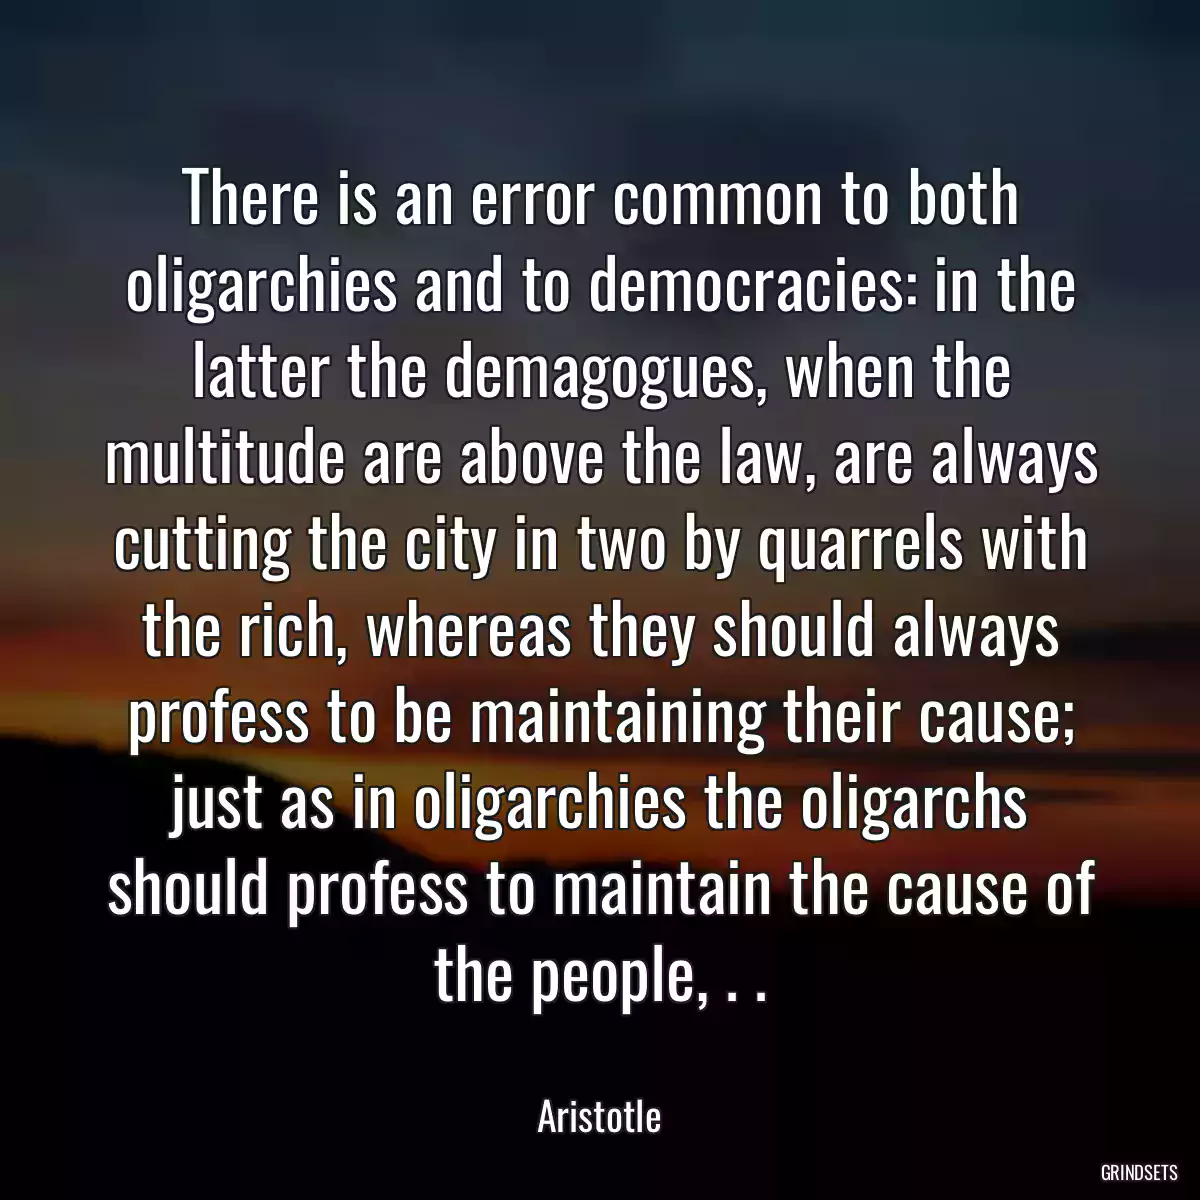 There is an error common to both oligarchies and to democracies: in the latter the demagogues, when the multitude are above the law, are always cutting the city in two by quarrels with the rich, whereas they should always profess to be maintaining their cause; just as in oligarchies the oligarchs should profess to maintain the cause of the people, . .